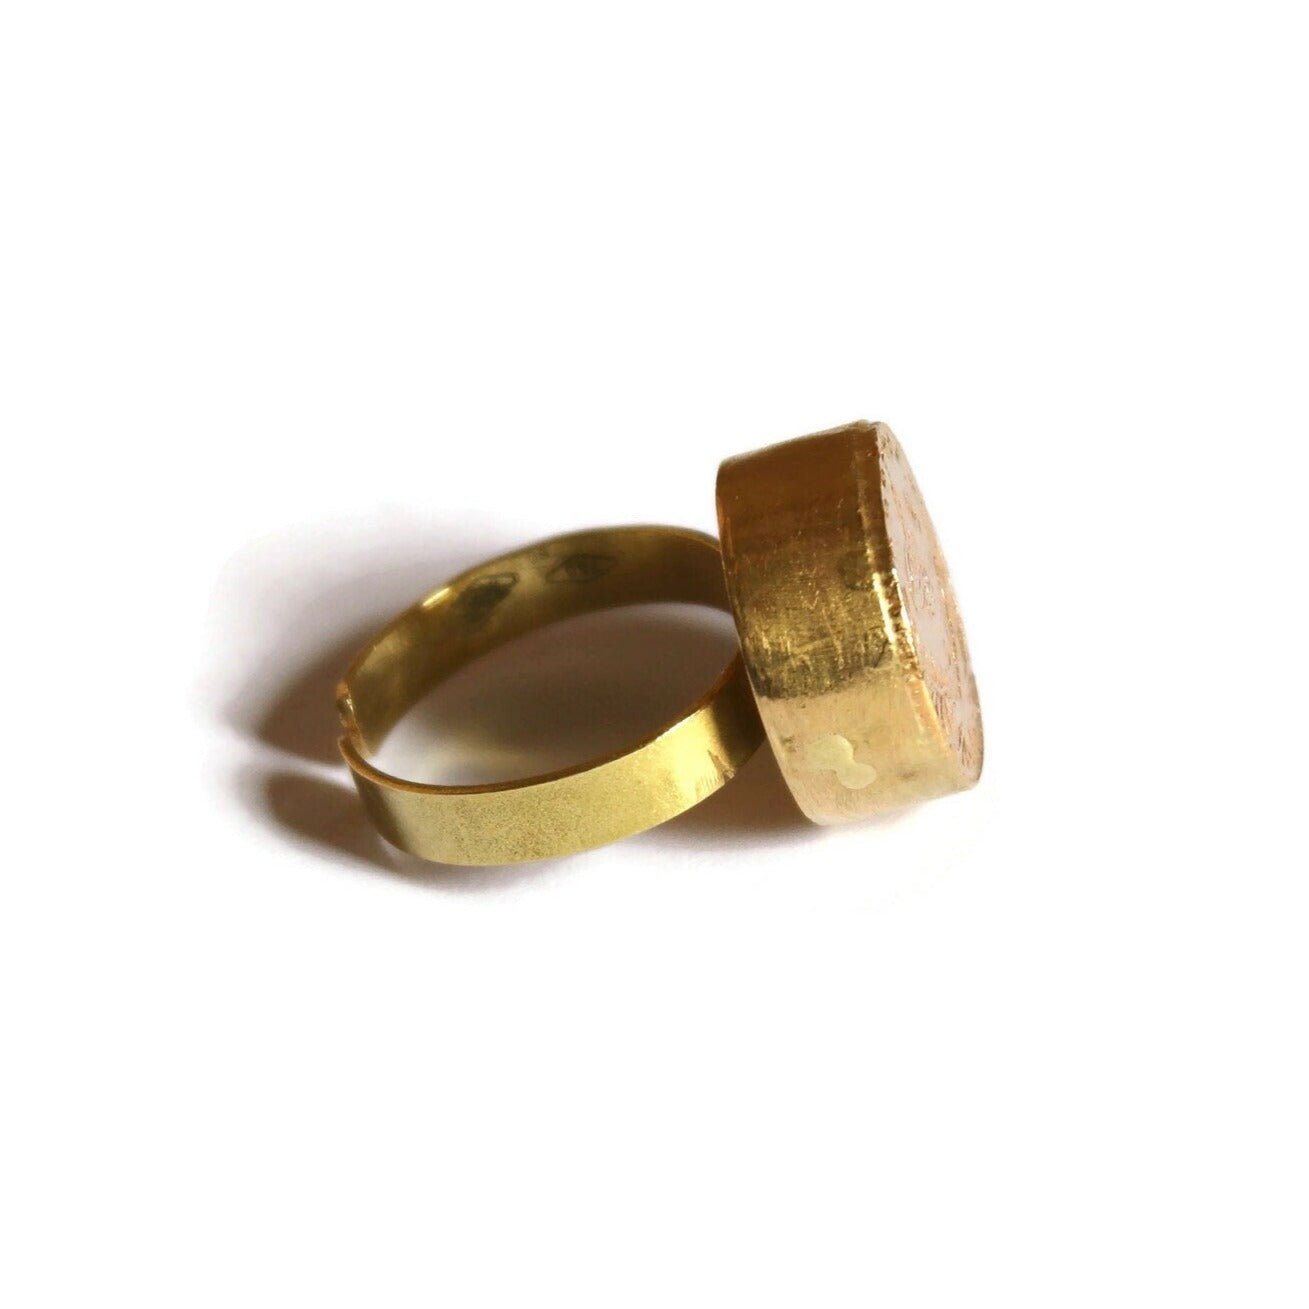 18k Gold Ring with Ottoman Stamp calligraphy. Islamic jewelry. Gold Adjustable Ring.